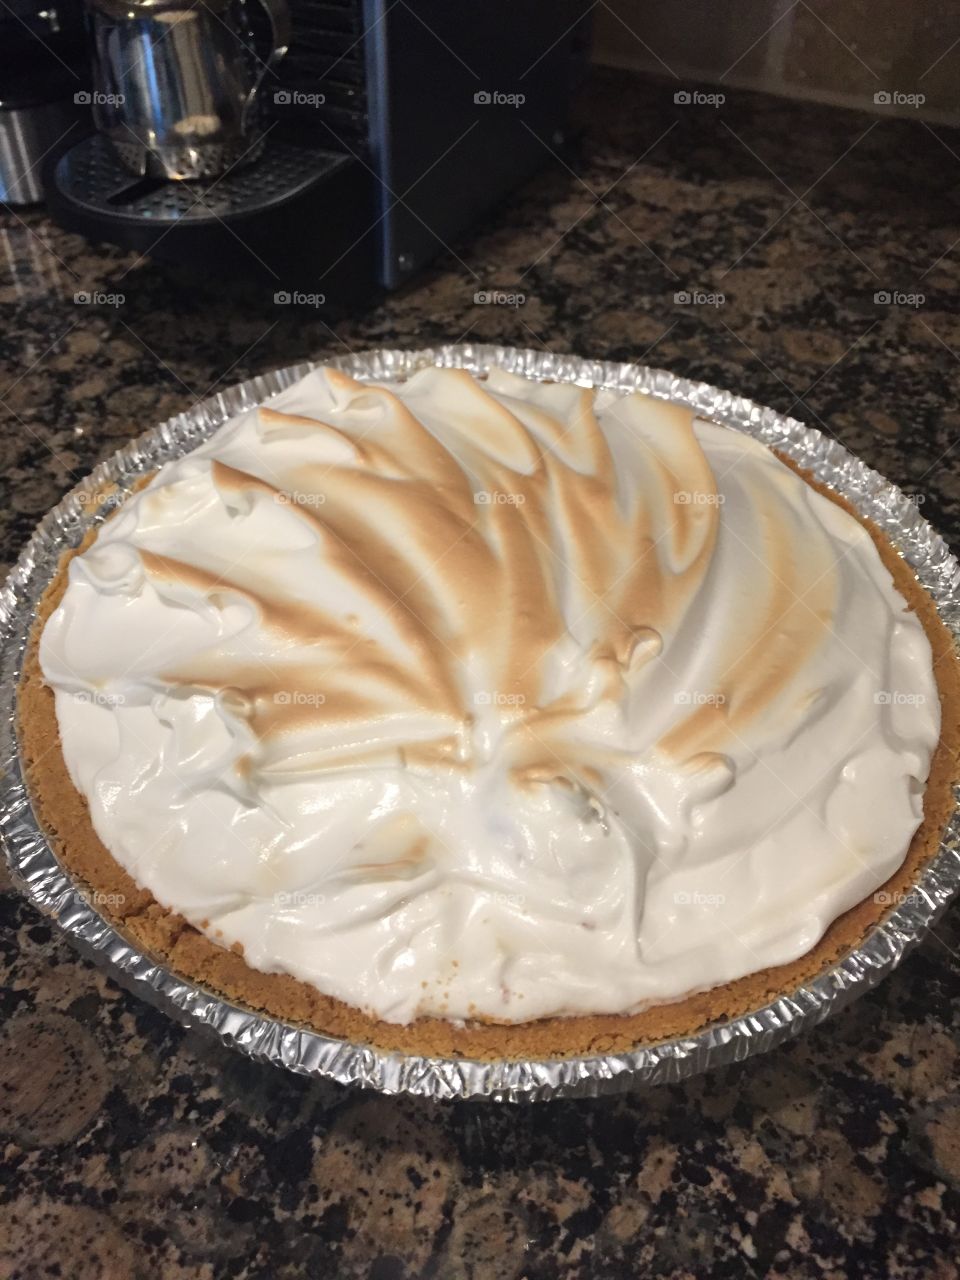 After hurricane Matthew passed through our city, we found most limes from our new lime tree on the floor. Not knowing what to do with so many of them, I decided to bake a key lime pie! I followed an online recipe. My first key lime pie ever was a success!! It was delicious! It goes to show you than when life throws you limes, you bake key lime pies! 